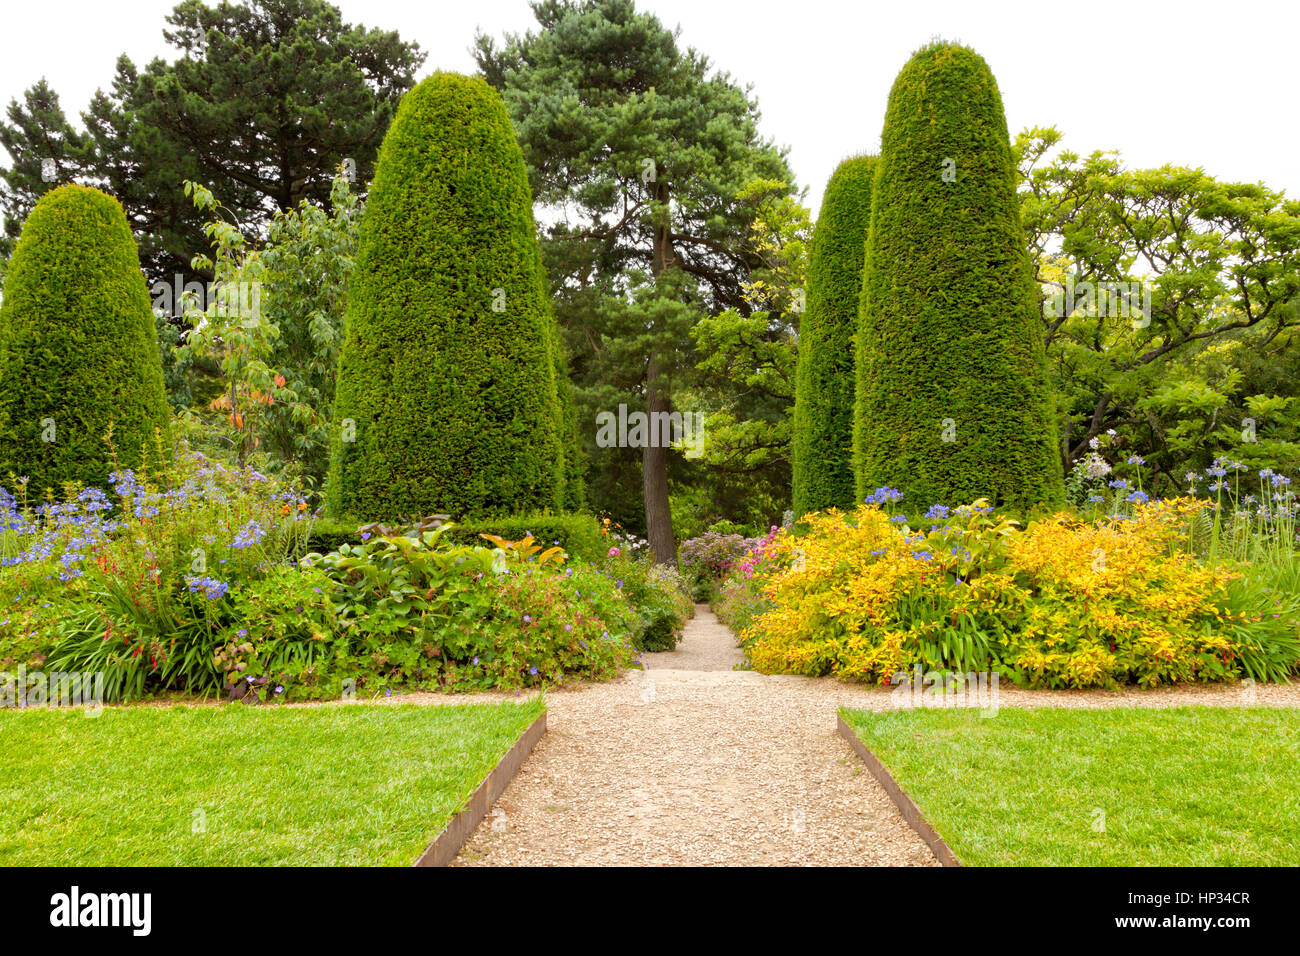 Stone pathway crossing summer flowers flowerbeds and lawn in a landscaped garden, with pine trees and shaped conifers Stock Photo